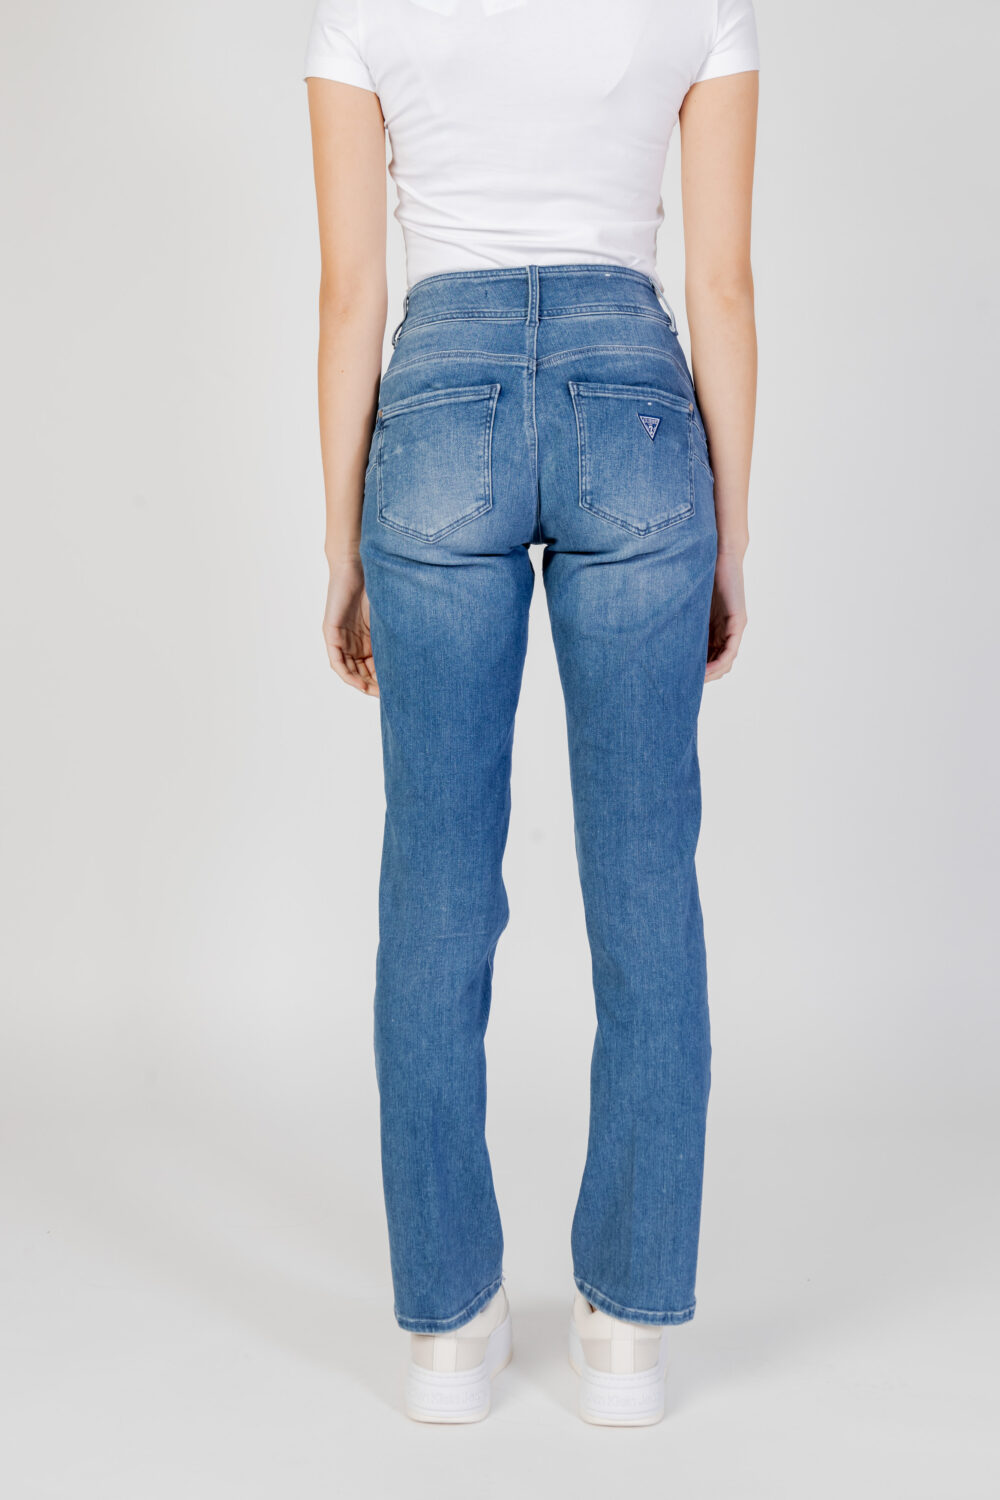 Jeans bootcut Guess SHAPE UP STRAIGHT Denim - Foto 3